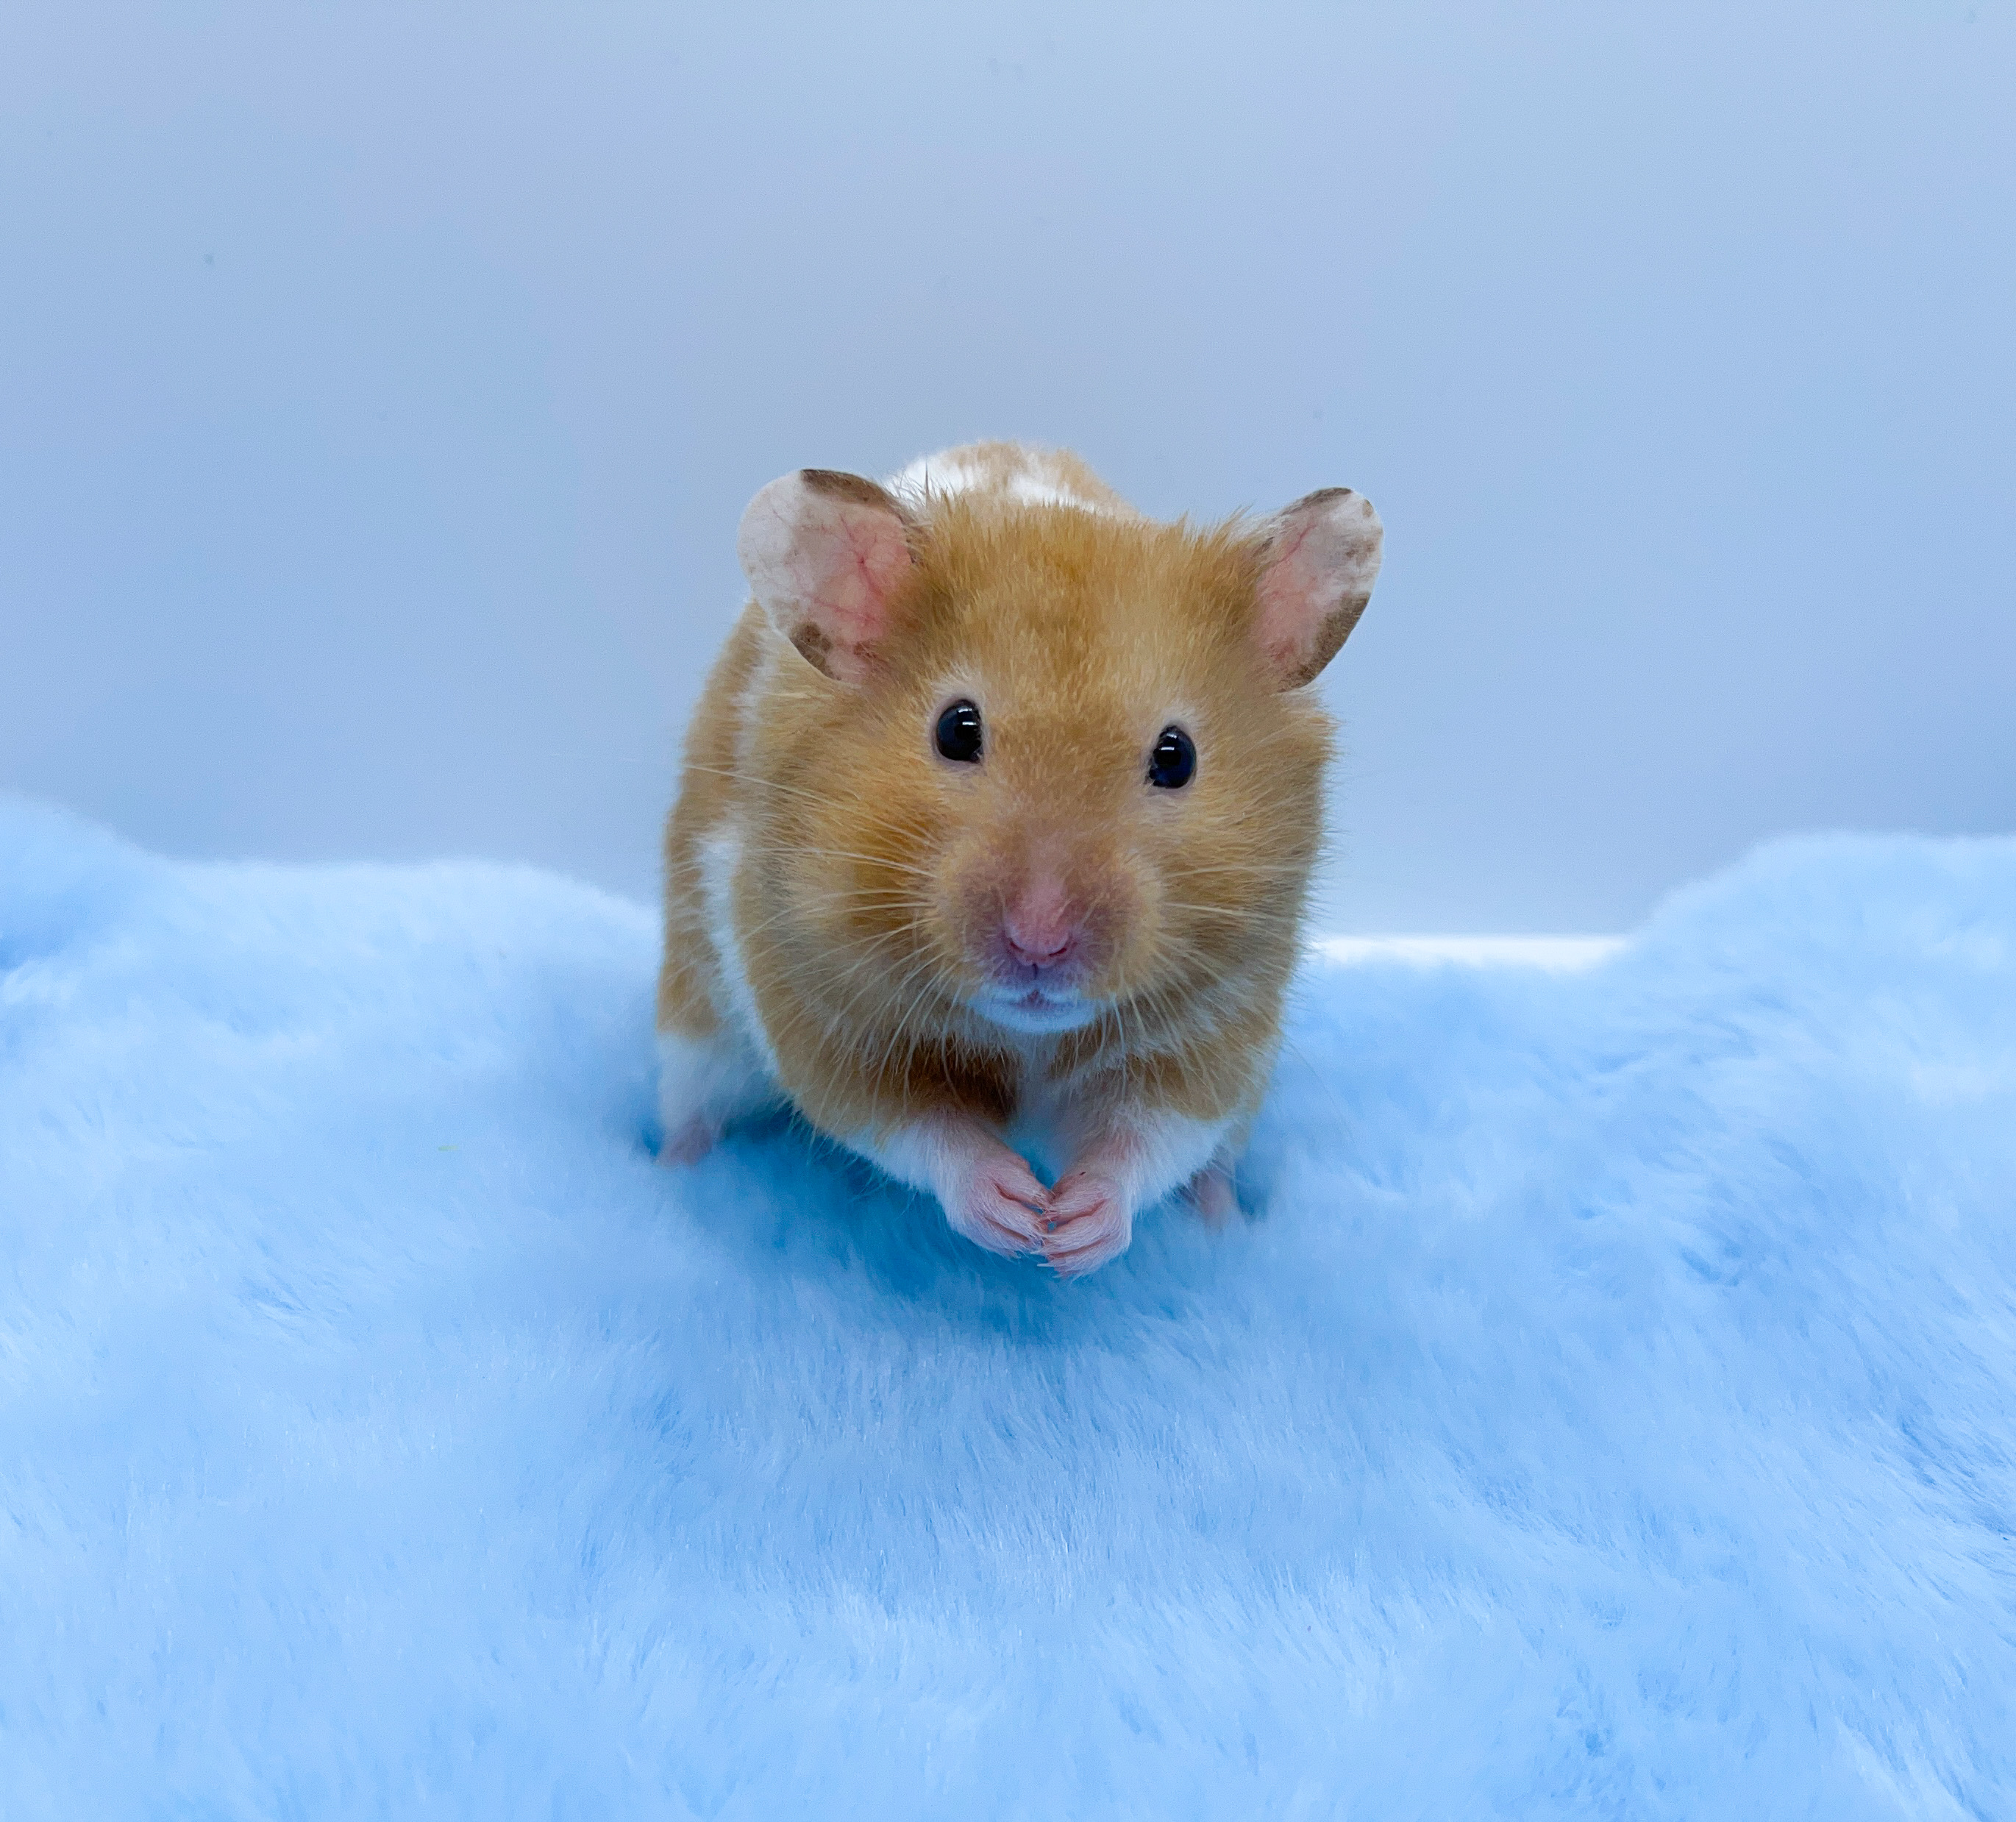 Syrian hamster on blue furry material